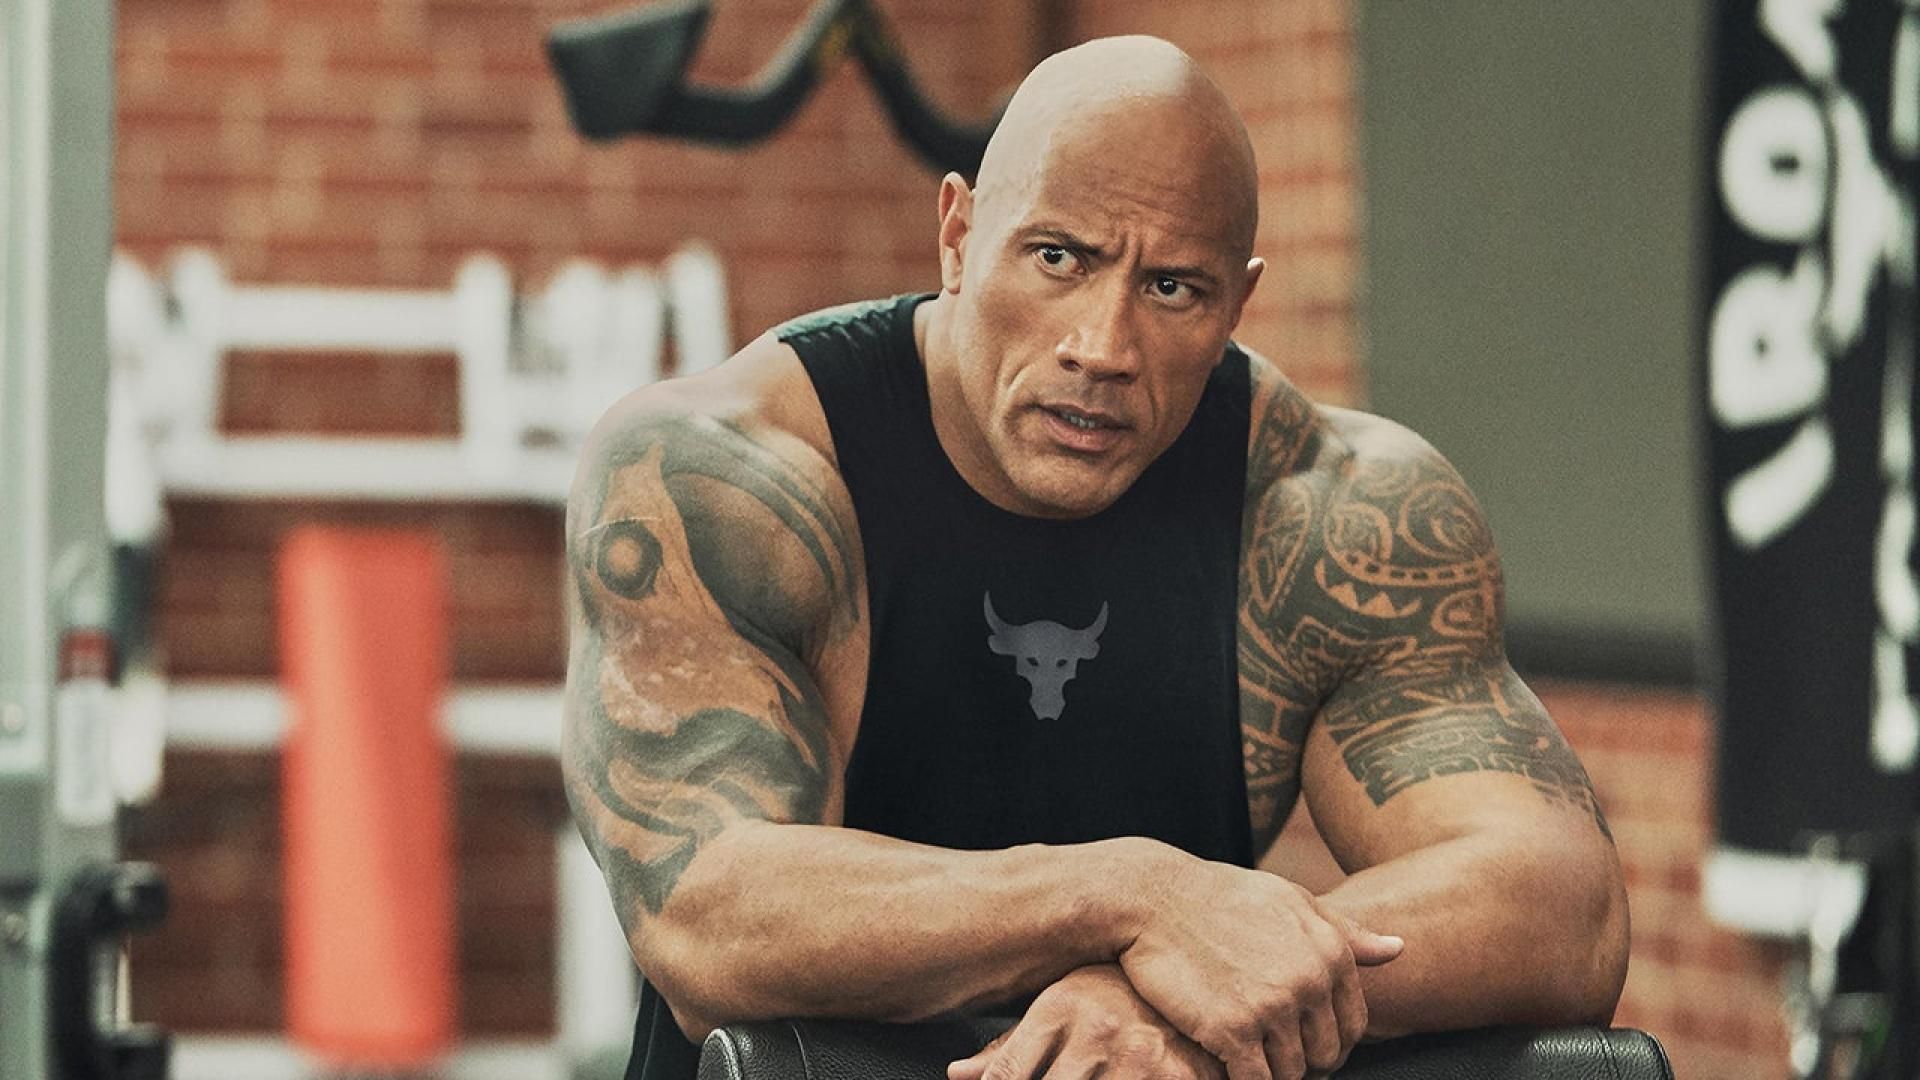 The Rock is one of the highest-paid actors in the world.